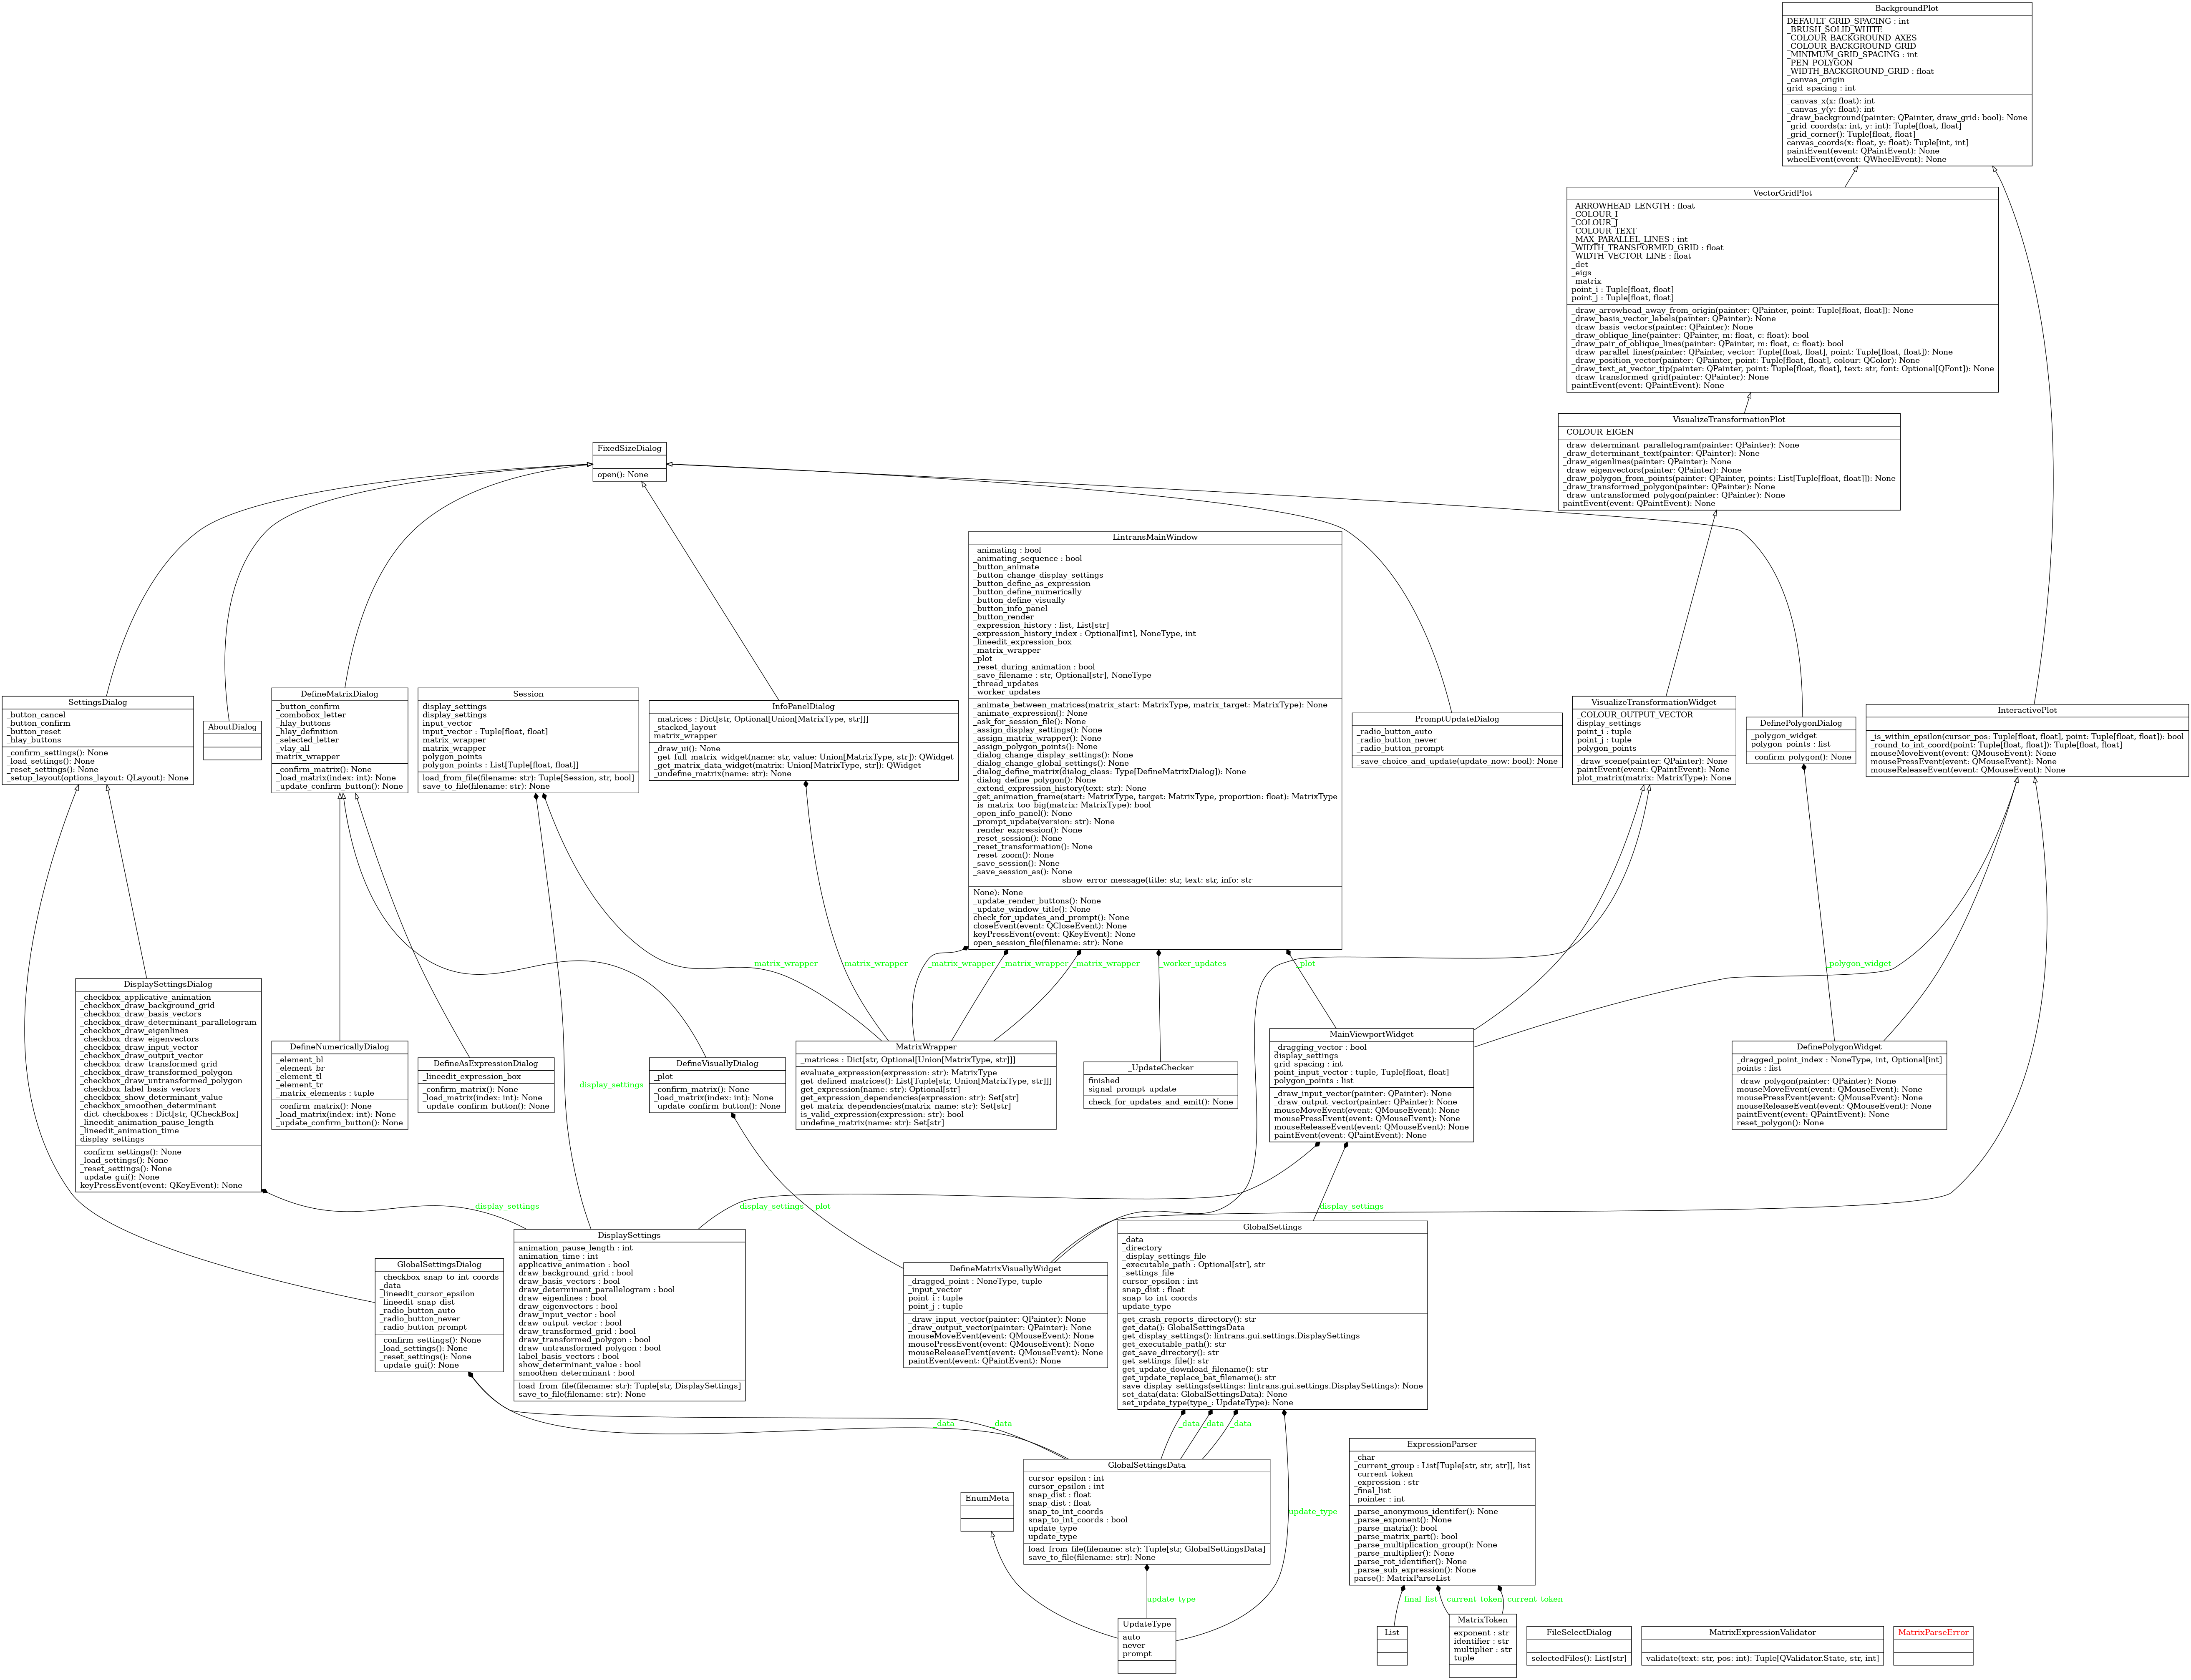 A UML diagram containing all the classes in the project